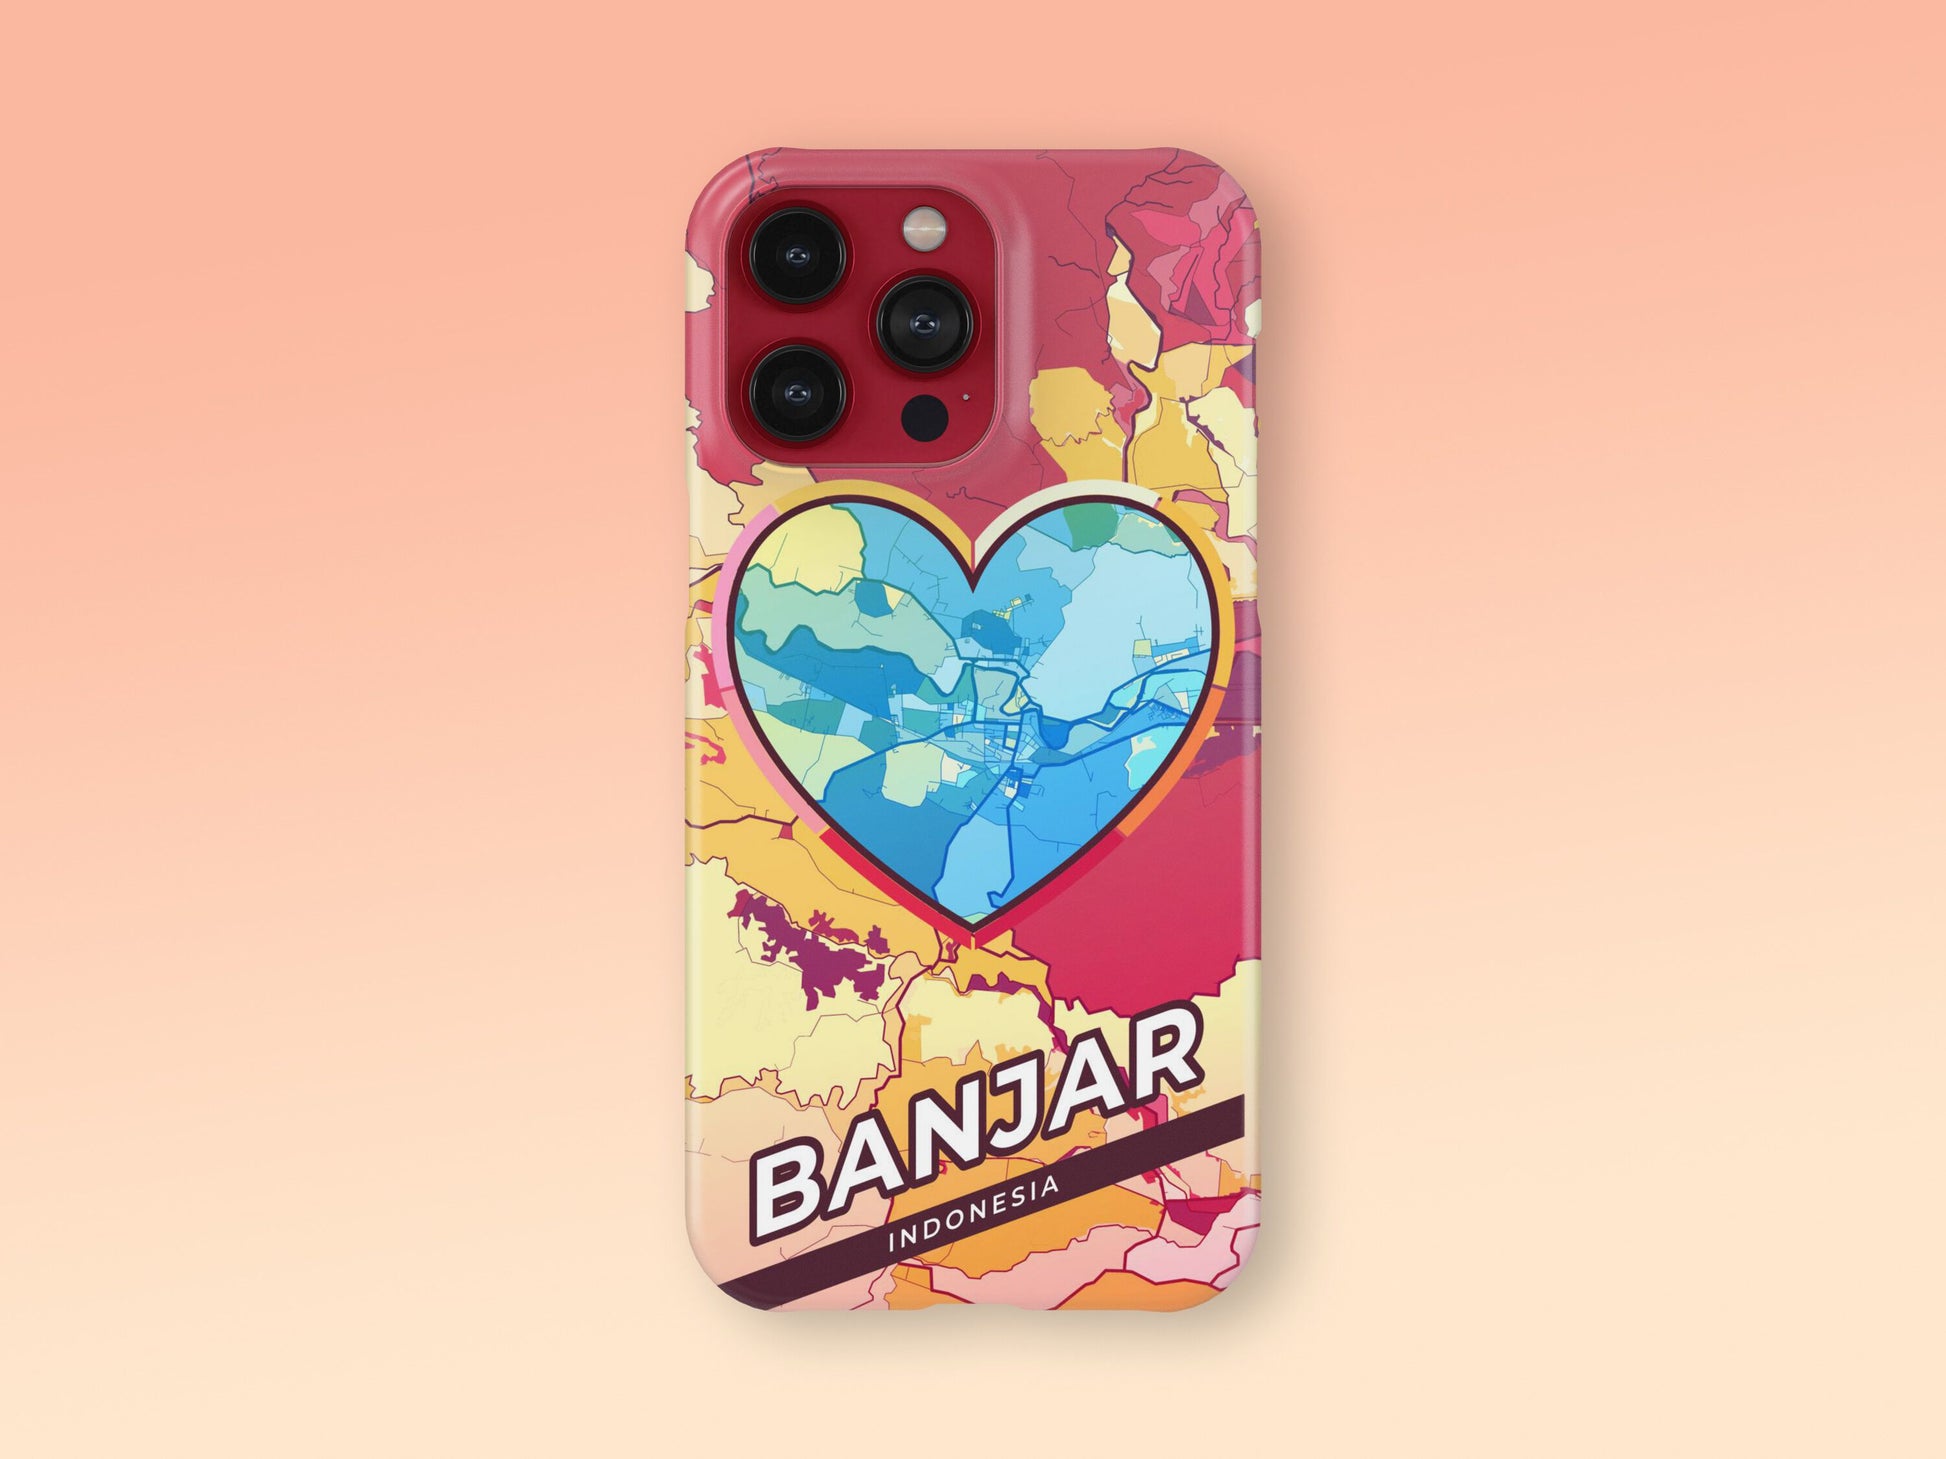 Banjar Indonesia slim phone case with colorful icon. Birthday, wedding or housewarming gift. Couple match cases. 2